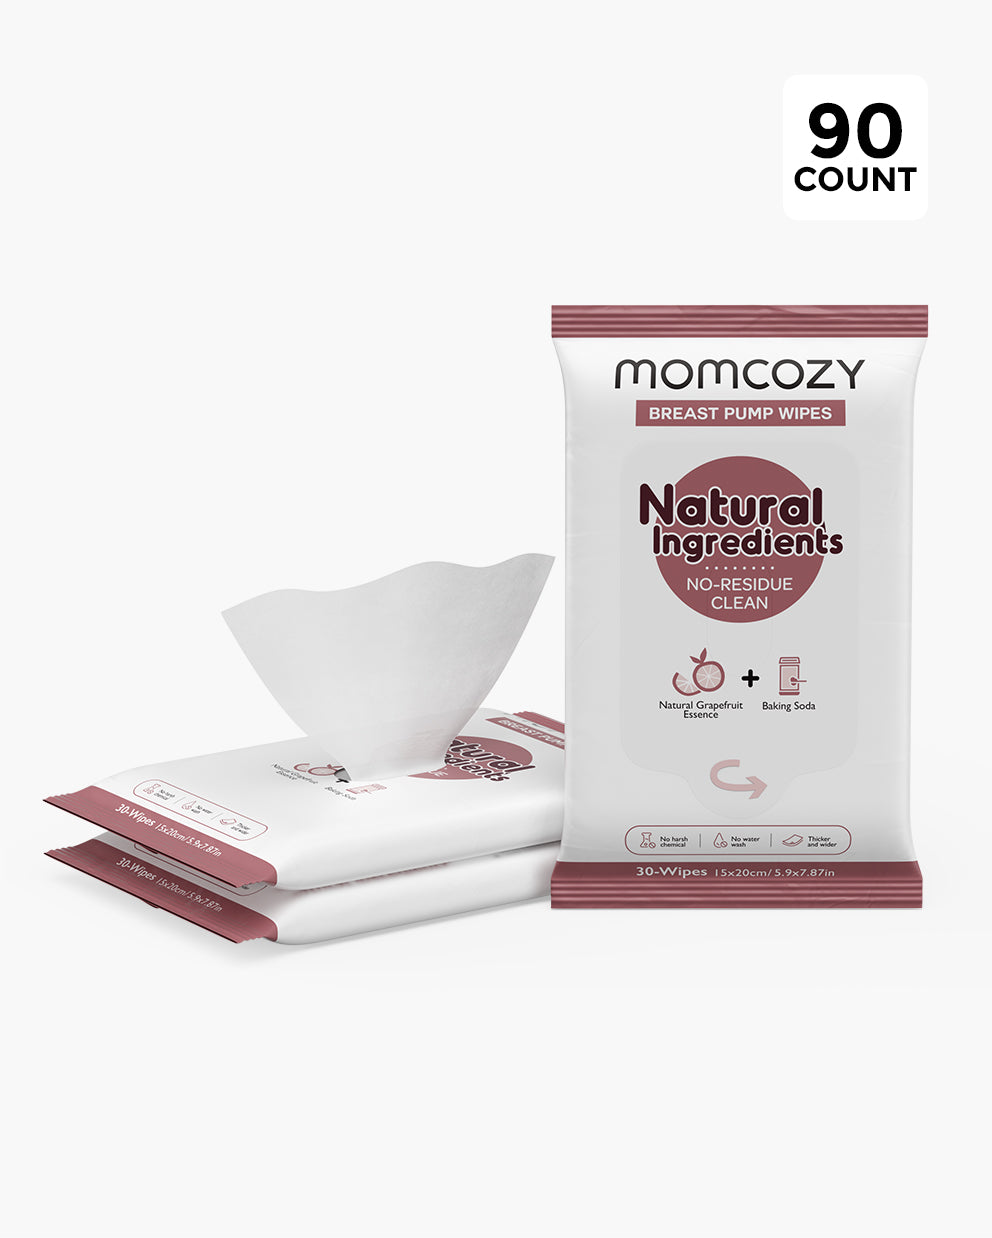 Momcozy S9 pro Wearable Breast Pump – Exclucy